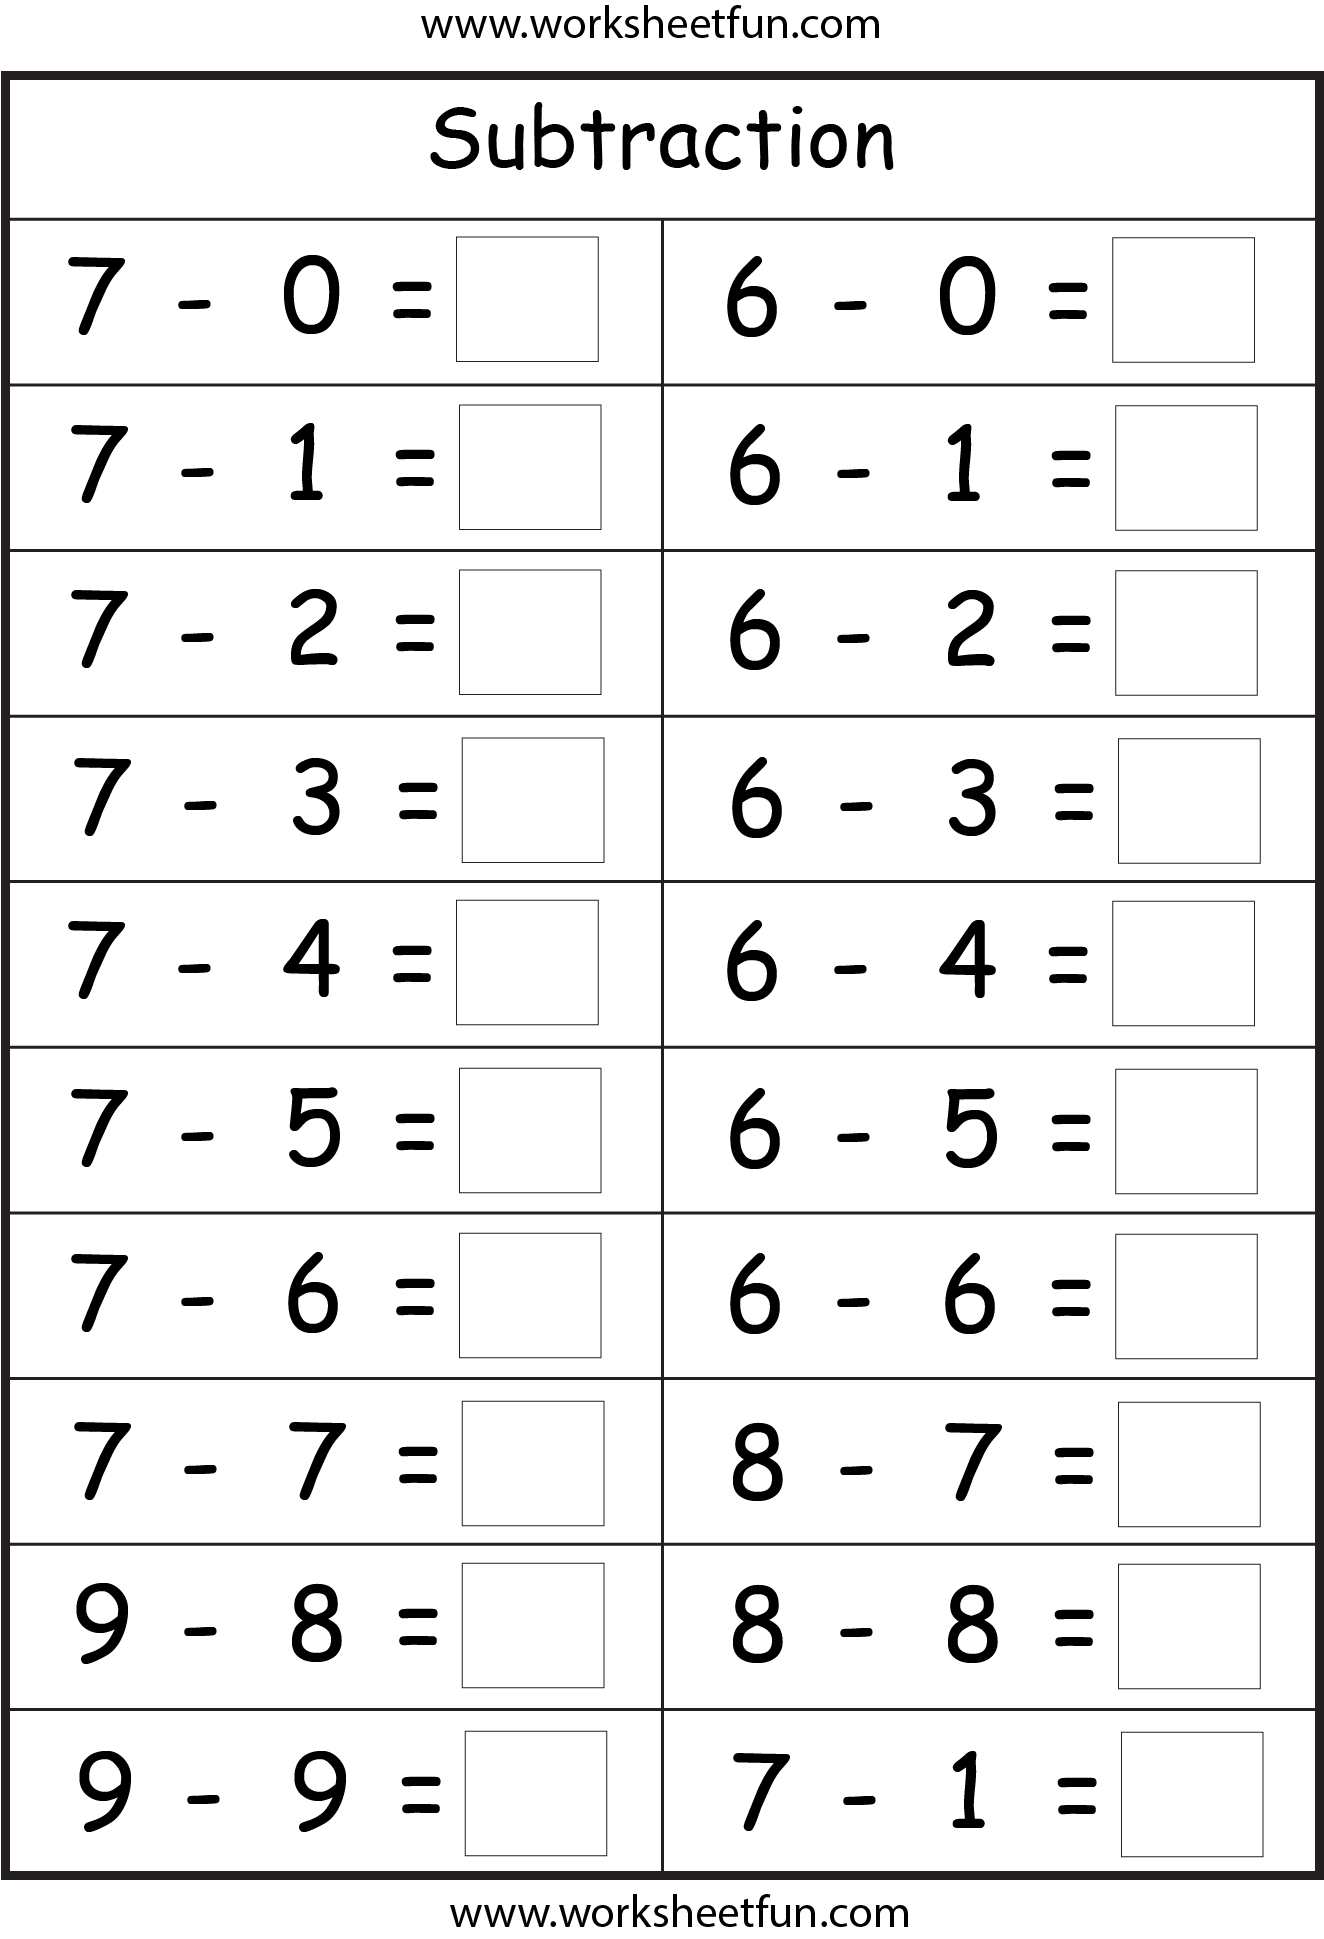 free-printable-subtraction-worksheets-printable-templates